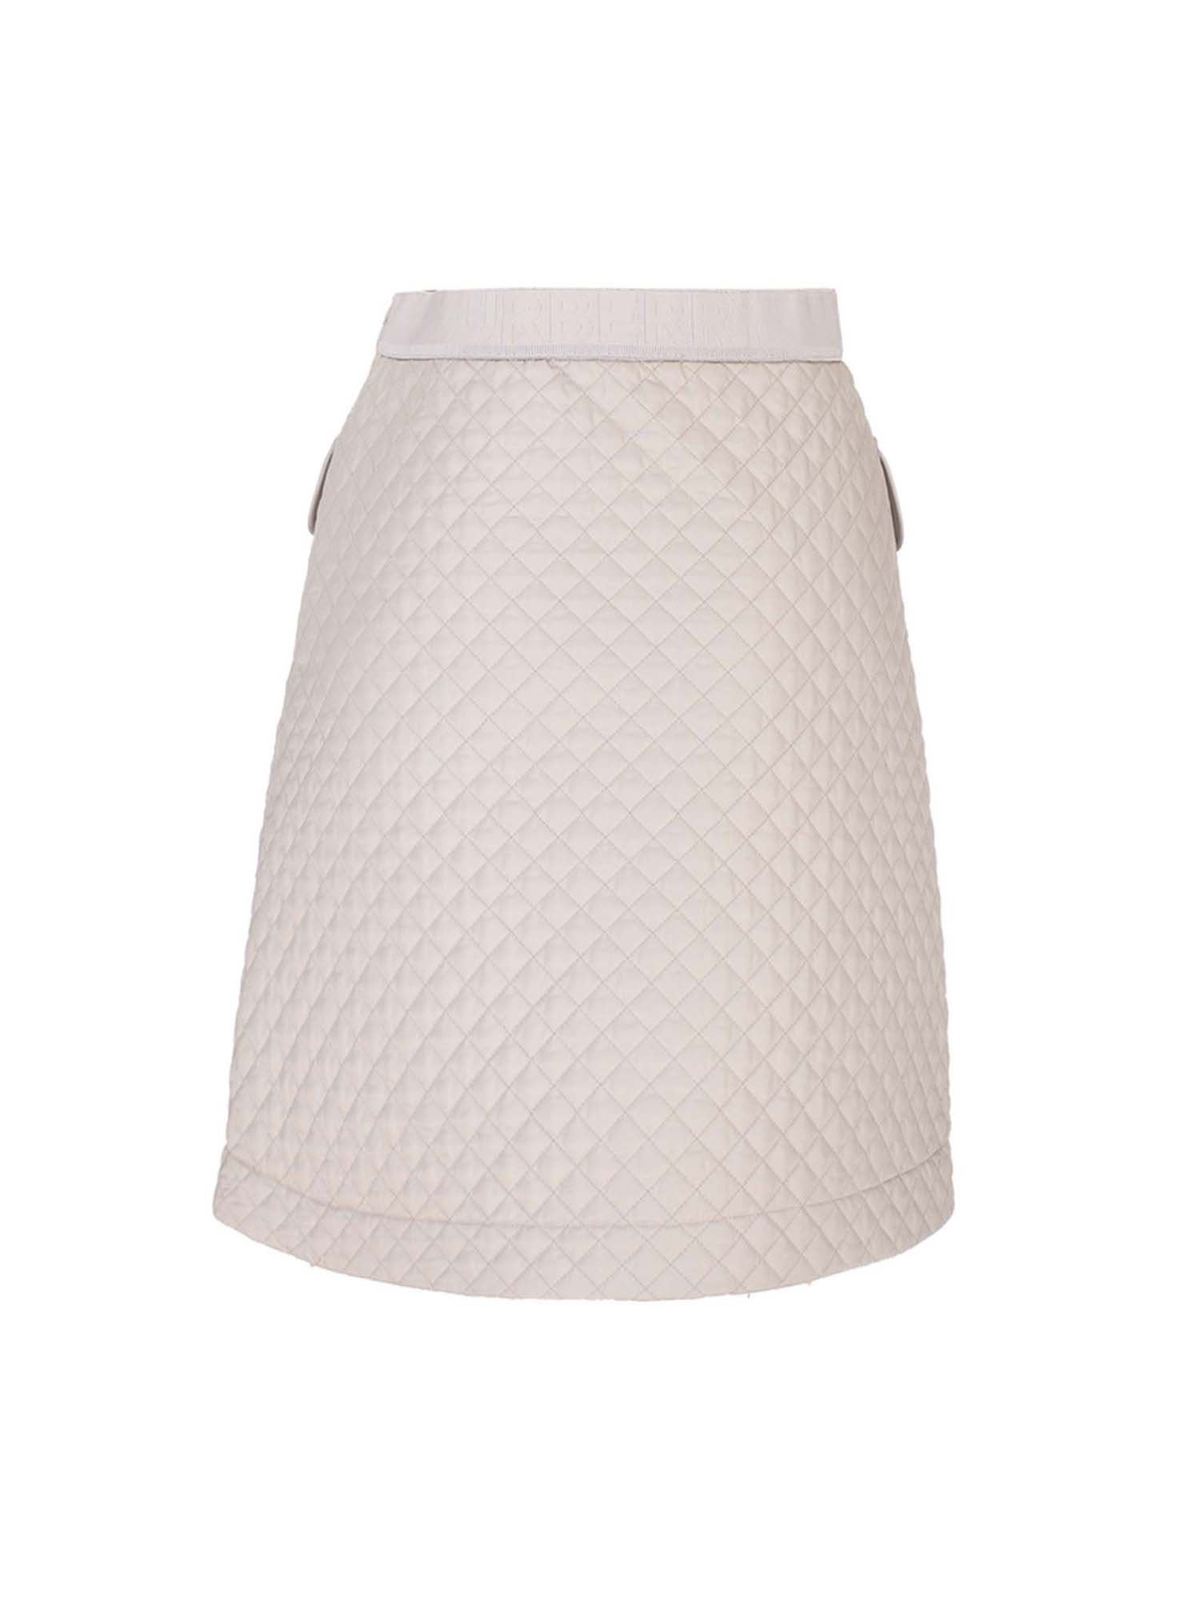 Skirts Burberry - Quilted monogram skirt - 8036534 | Shop online at iKRIX